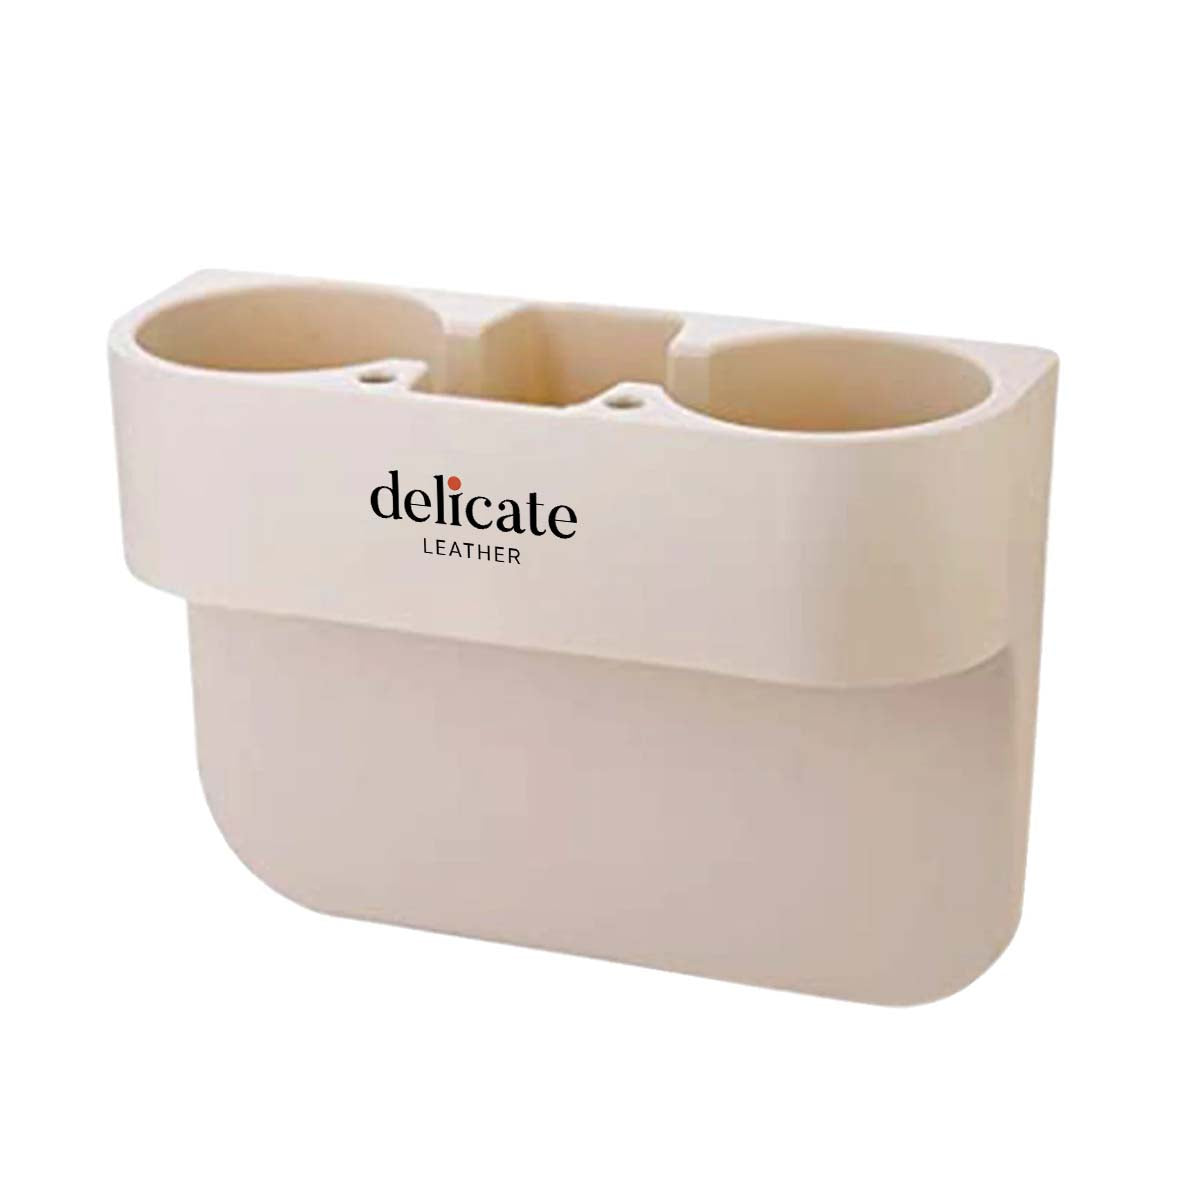 Delicate Leather Cup Holder Portable Multifunction Vehicle Seat Cup Cell Phone Drinks Holder Box Car Interior Organizer, Custom For Your Cars, Car Accessories FJ11995